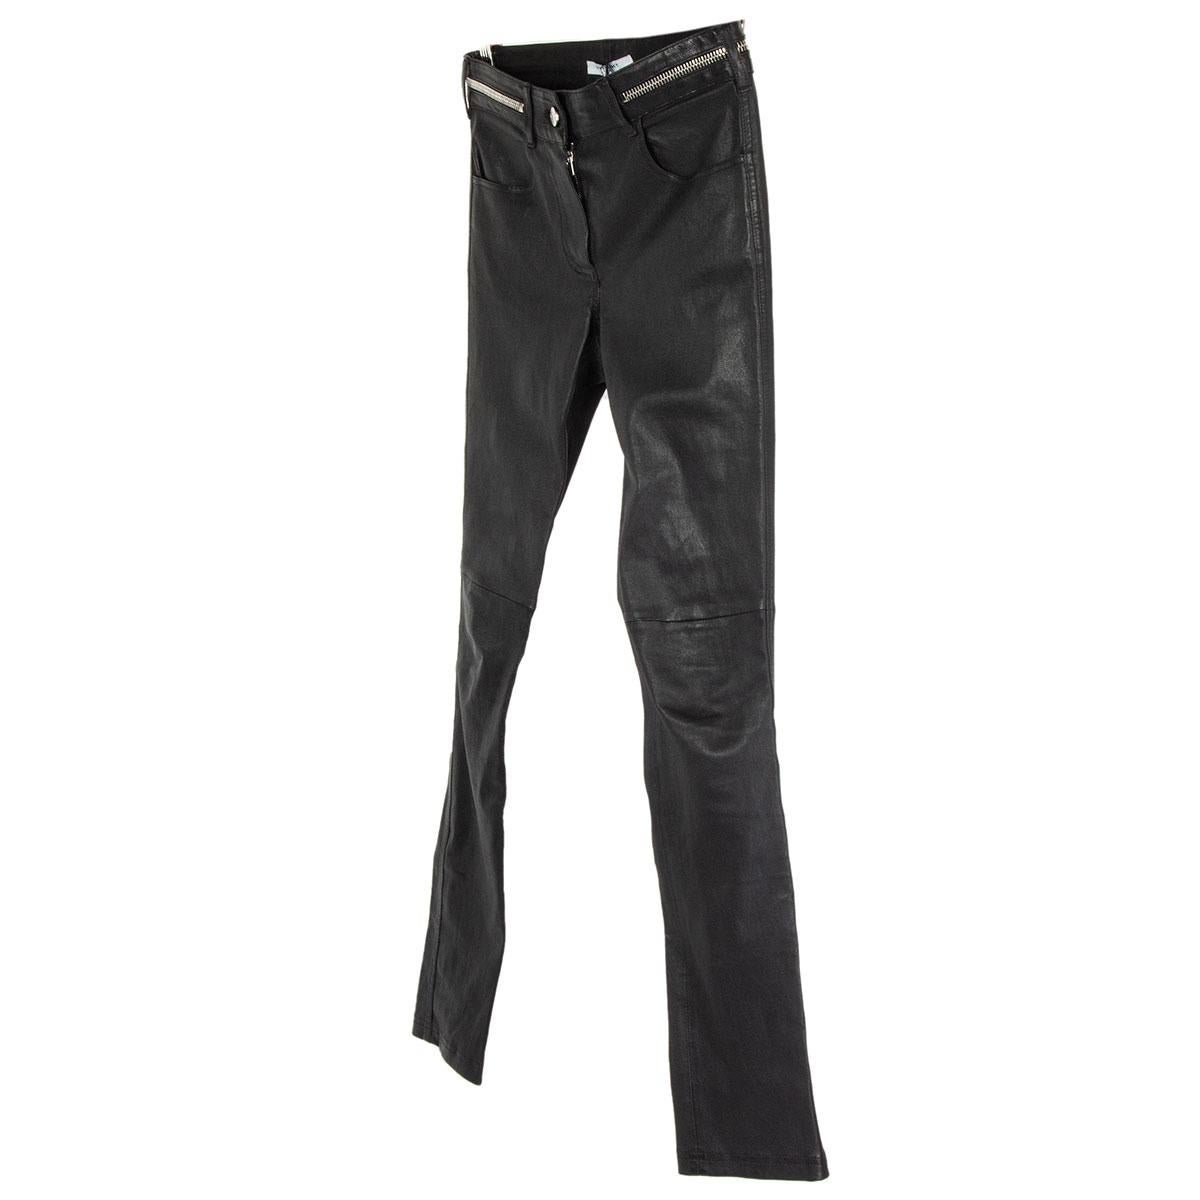 authentic Givenchy pants in black lambskin leather (100%) with zipper detail on the waist-line and at the hem on the back. Closes with one button and a zipper on the front. Lined in black cotton (95%) and elastane (5%). Has been worn and is in